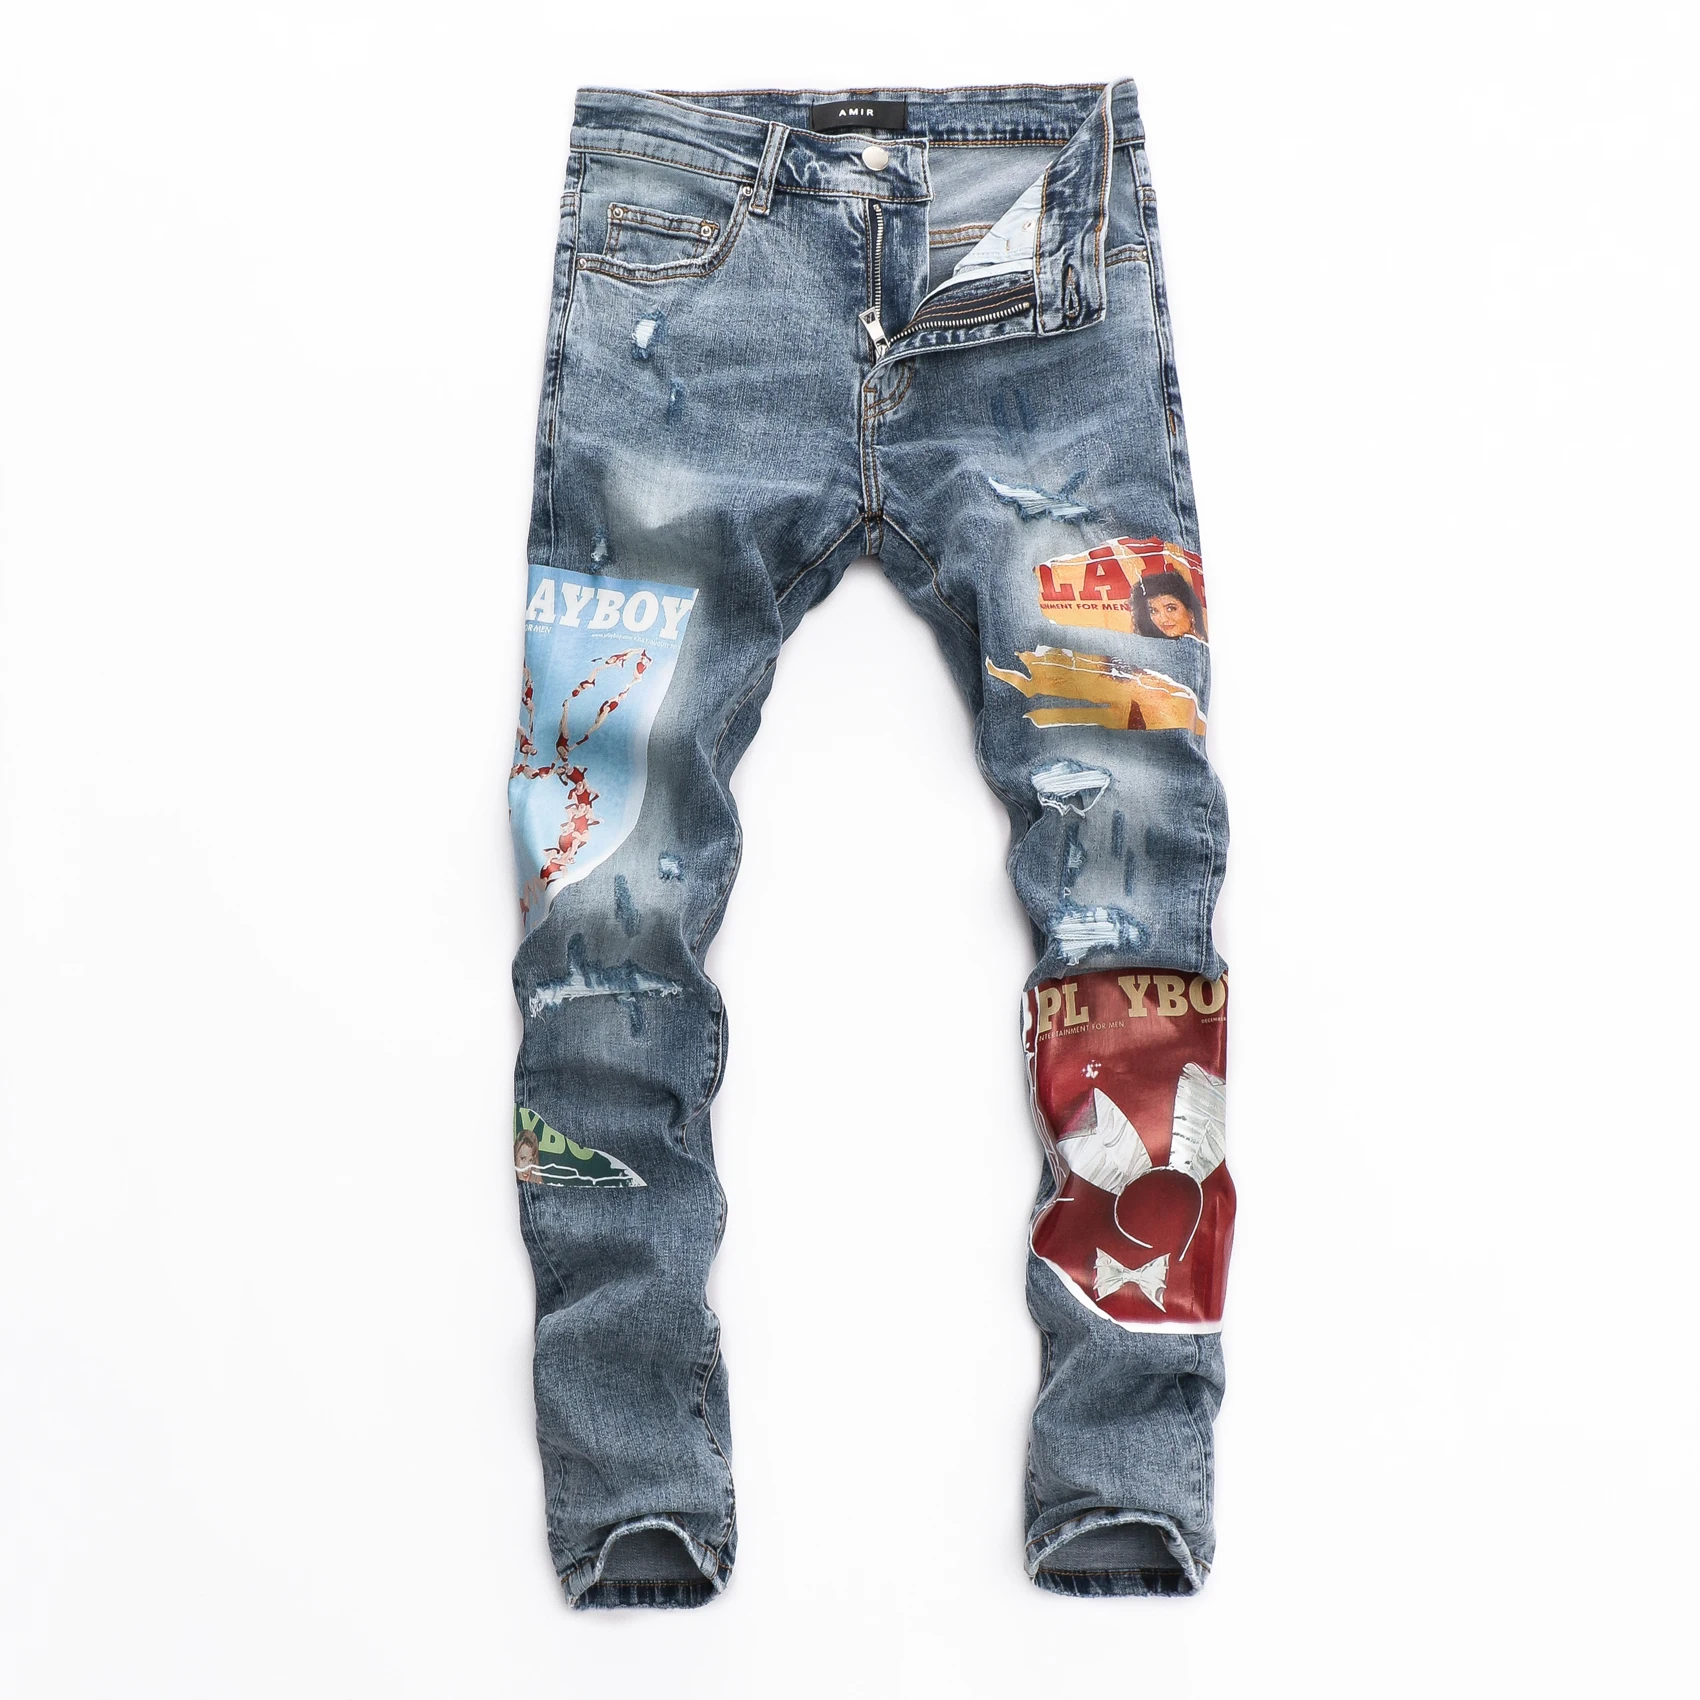 Jeans Men Slim Fit Casual Graffiti Printed Ripped Tights Jeans Males Small Foot Tide Ripped Jeans For Men Pantalon Moto Homme